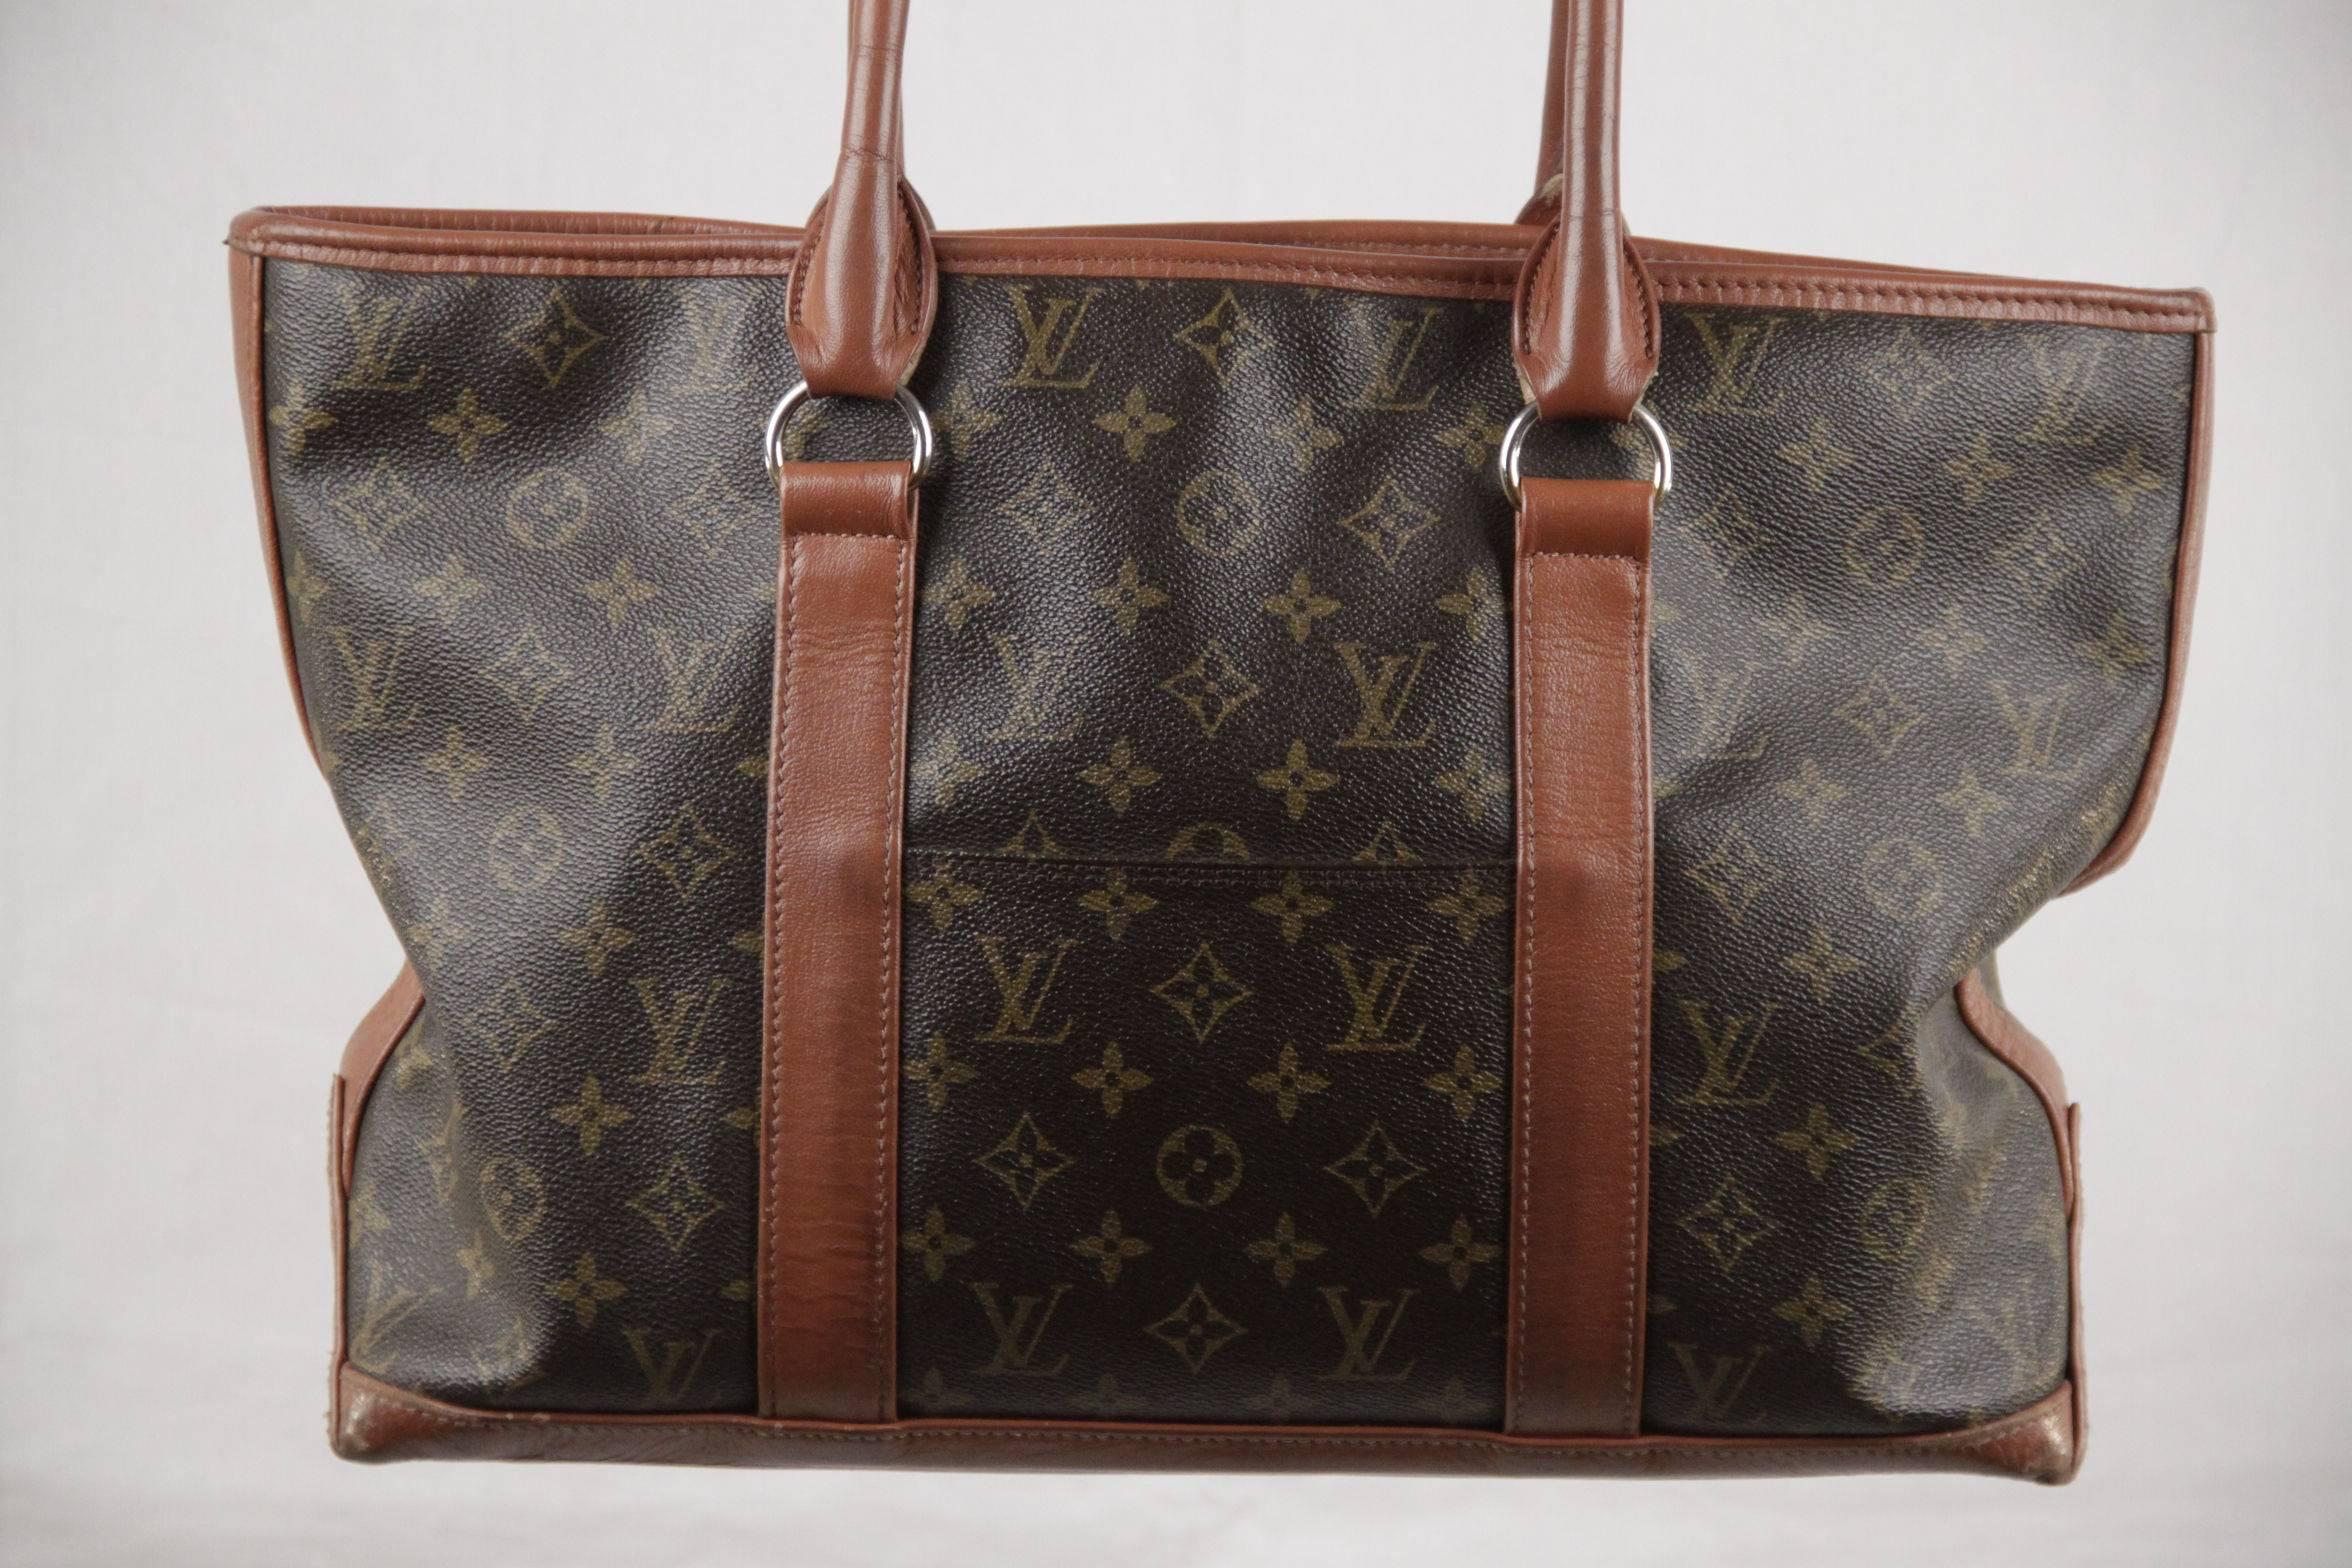  - Model : Louis Vuitton 'Sac Weekend' tote

- Discontinued in the early 1990's

- Brown Monogram canvas

- Genuine leather details

- Gold metal hardware

- 1 open pocket on the front and 1 open pocket on the back

- Upper zipper closure

- 1